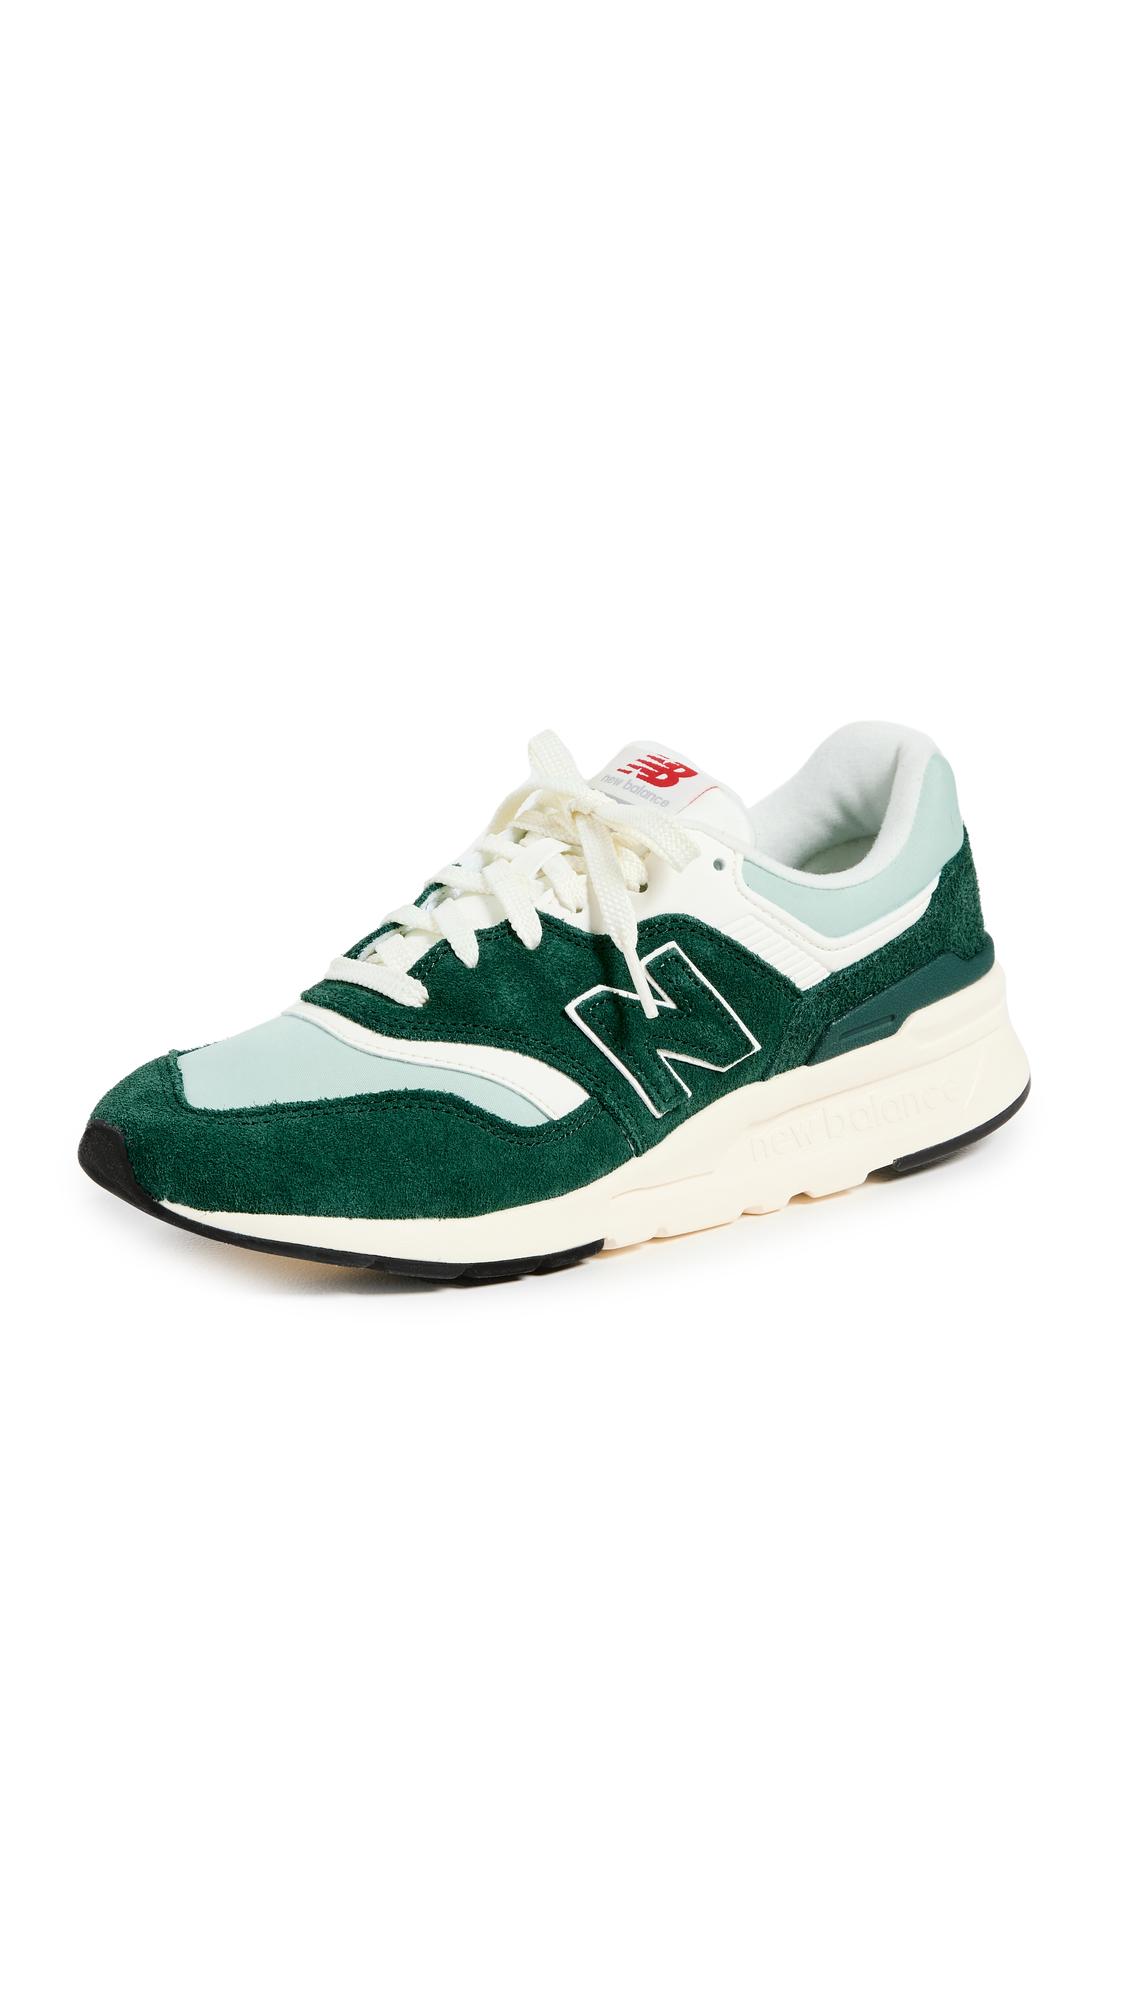 New Balance 997h Sneakers in Green | Lyst